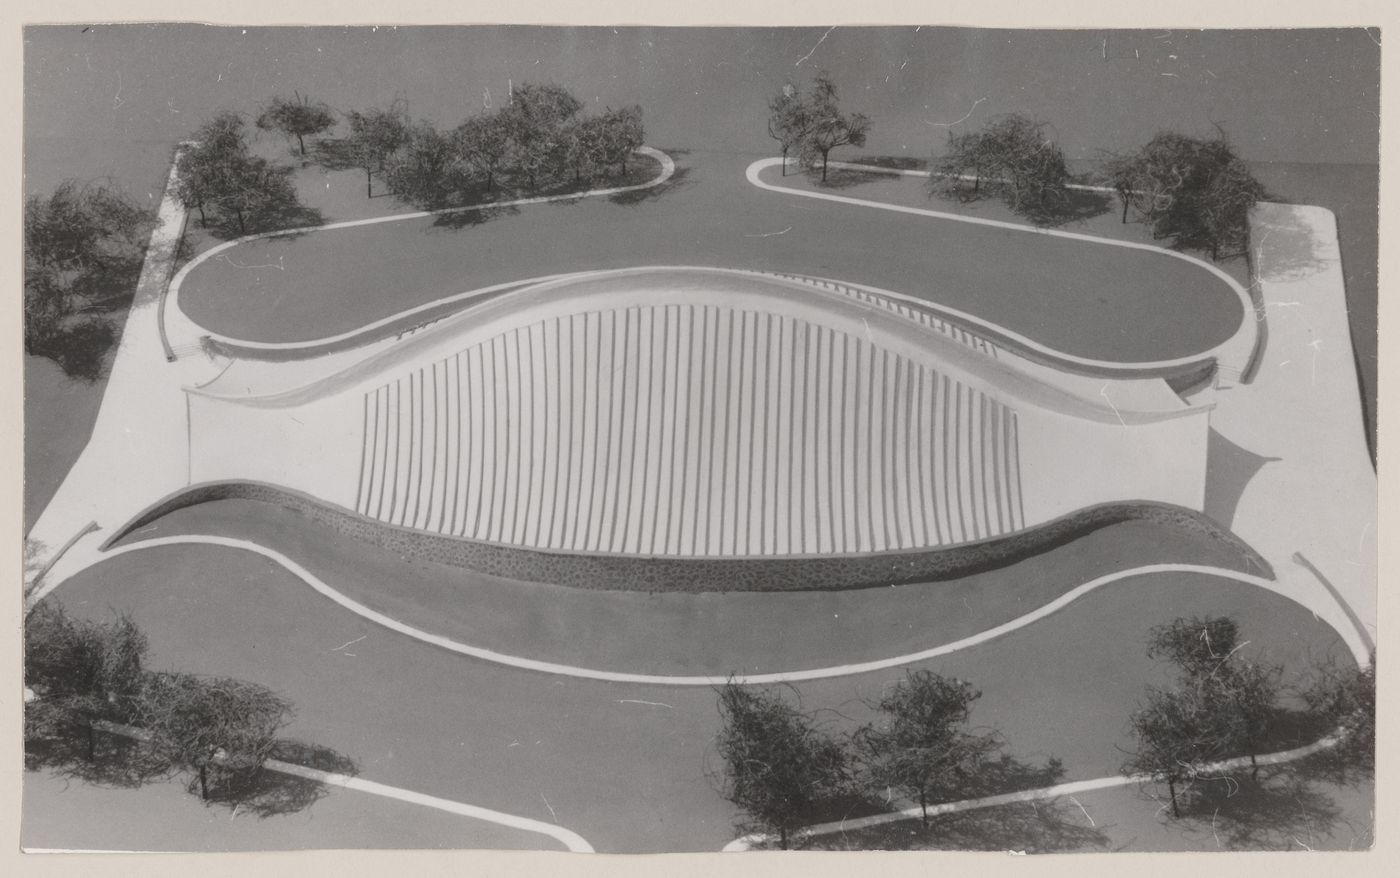 View of model for David S. Ingalls Hockey Rink, New Haven, Connecticut, United States
